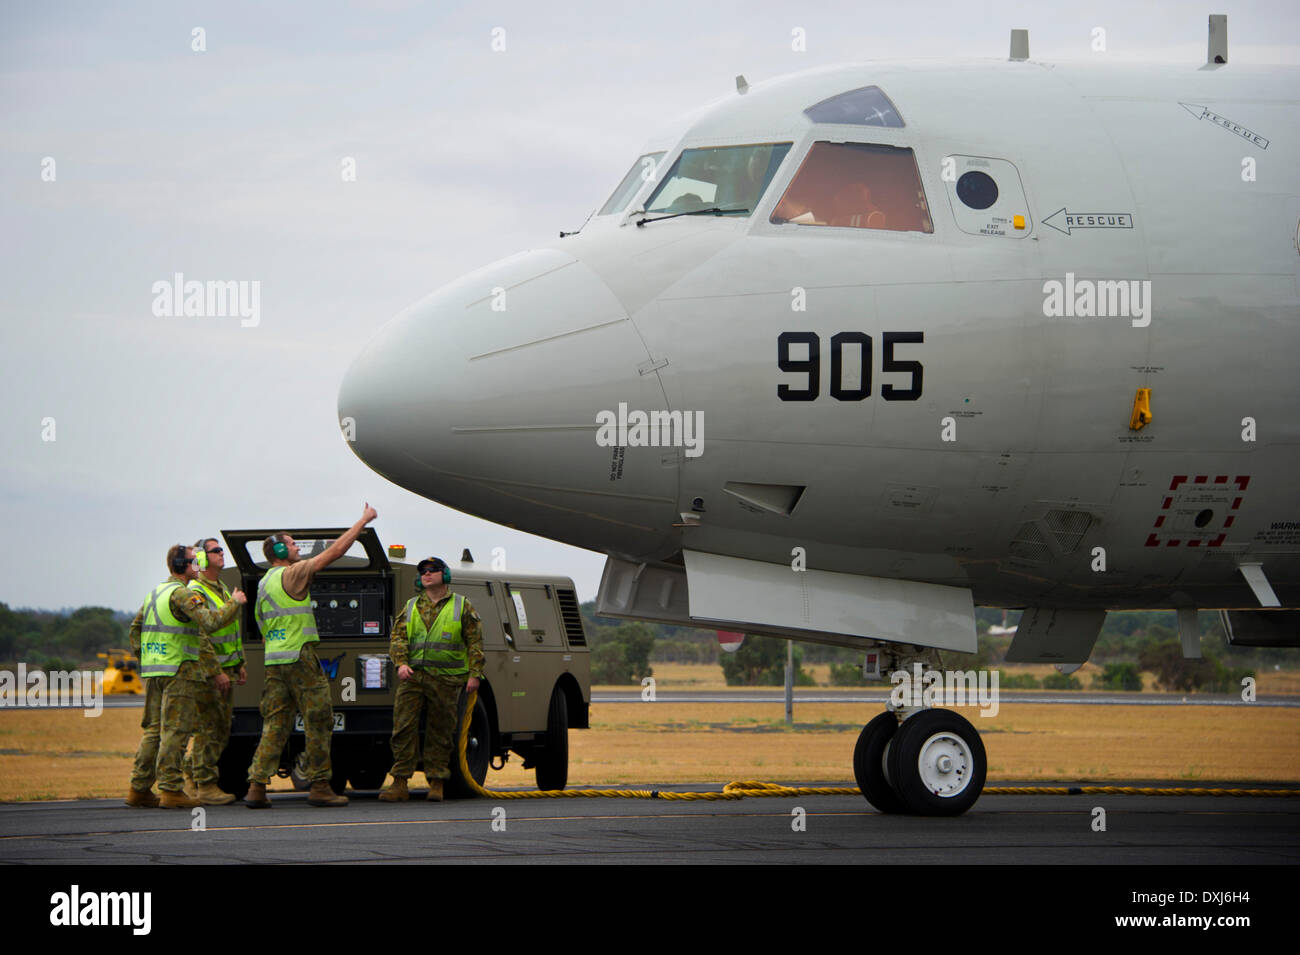 Canberra. 25th Mar, 2014. Royal Australian Air Force (RAAF) ground personnel provide support to a South Korean Navy P3-C Orion aircraft following its arrival at RAAF Base Pearce in west Australia March 25, 2014. © Australian Department of Defense/Xinhua/Alamy Live News Stock Photo